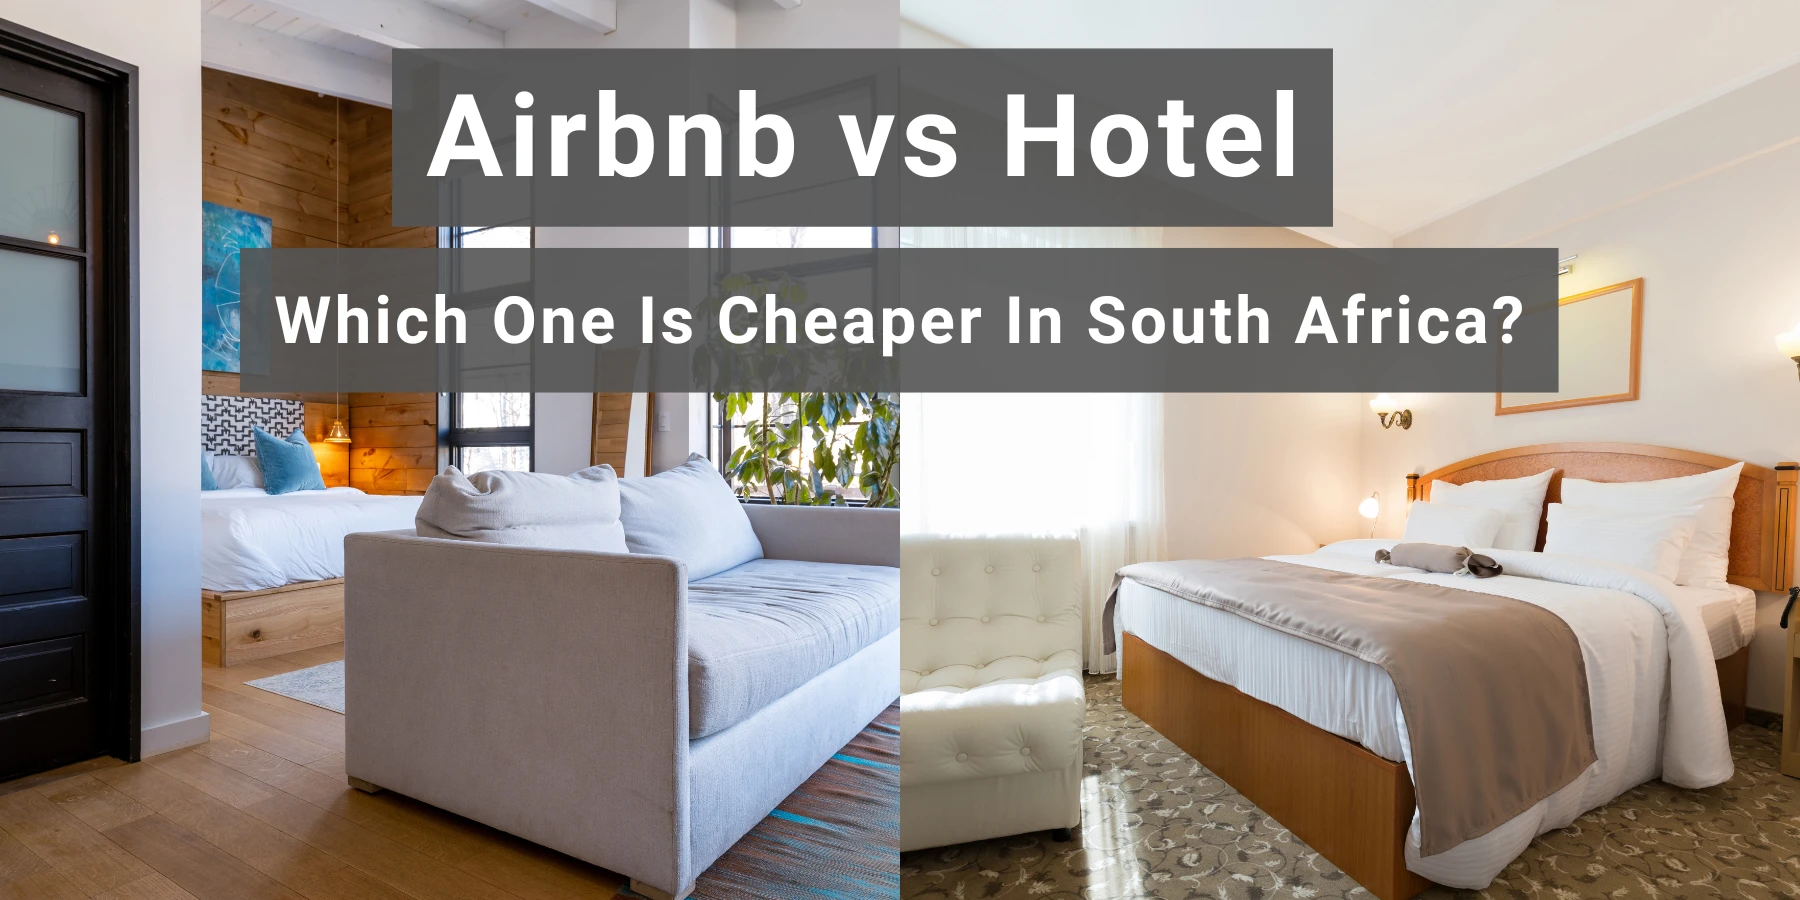 Is It Cheaper to Stay in a Hotel or Airbnb in South Africa?